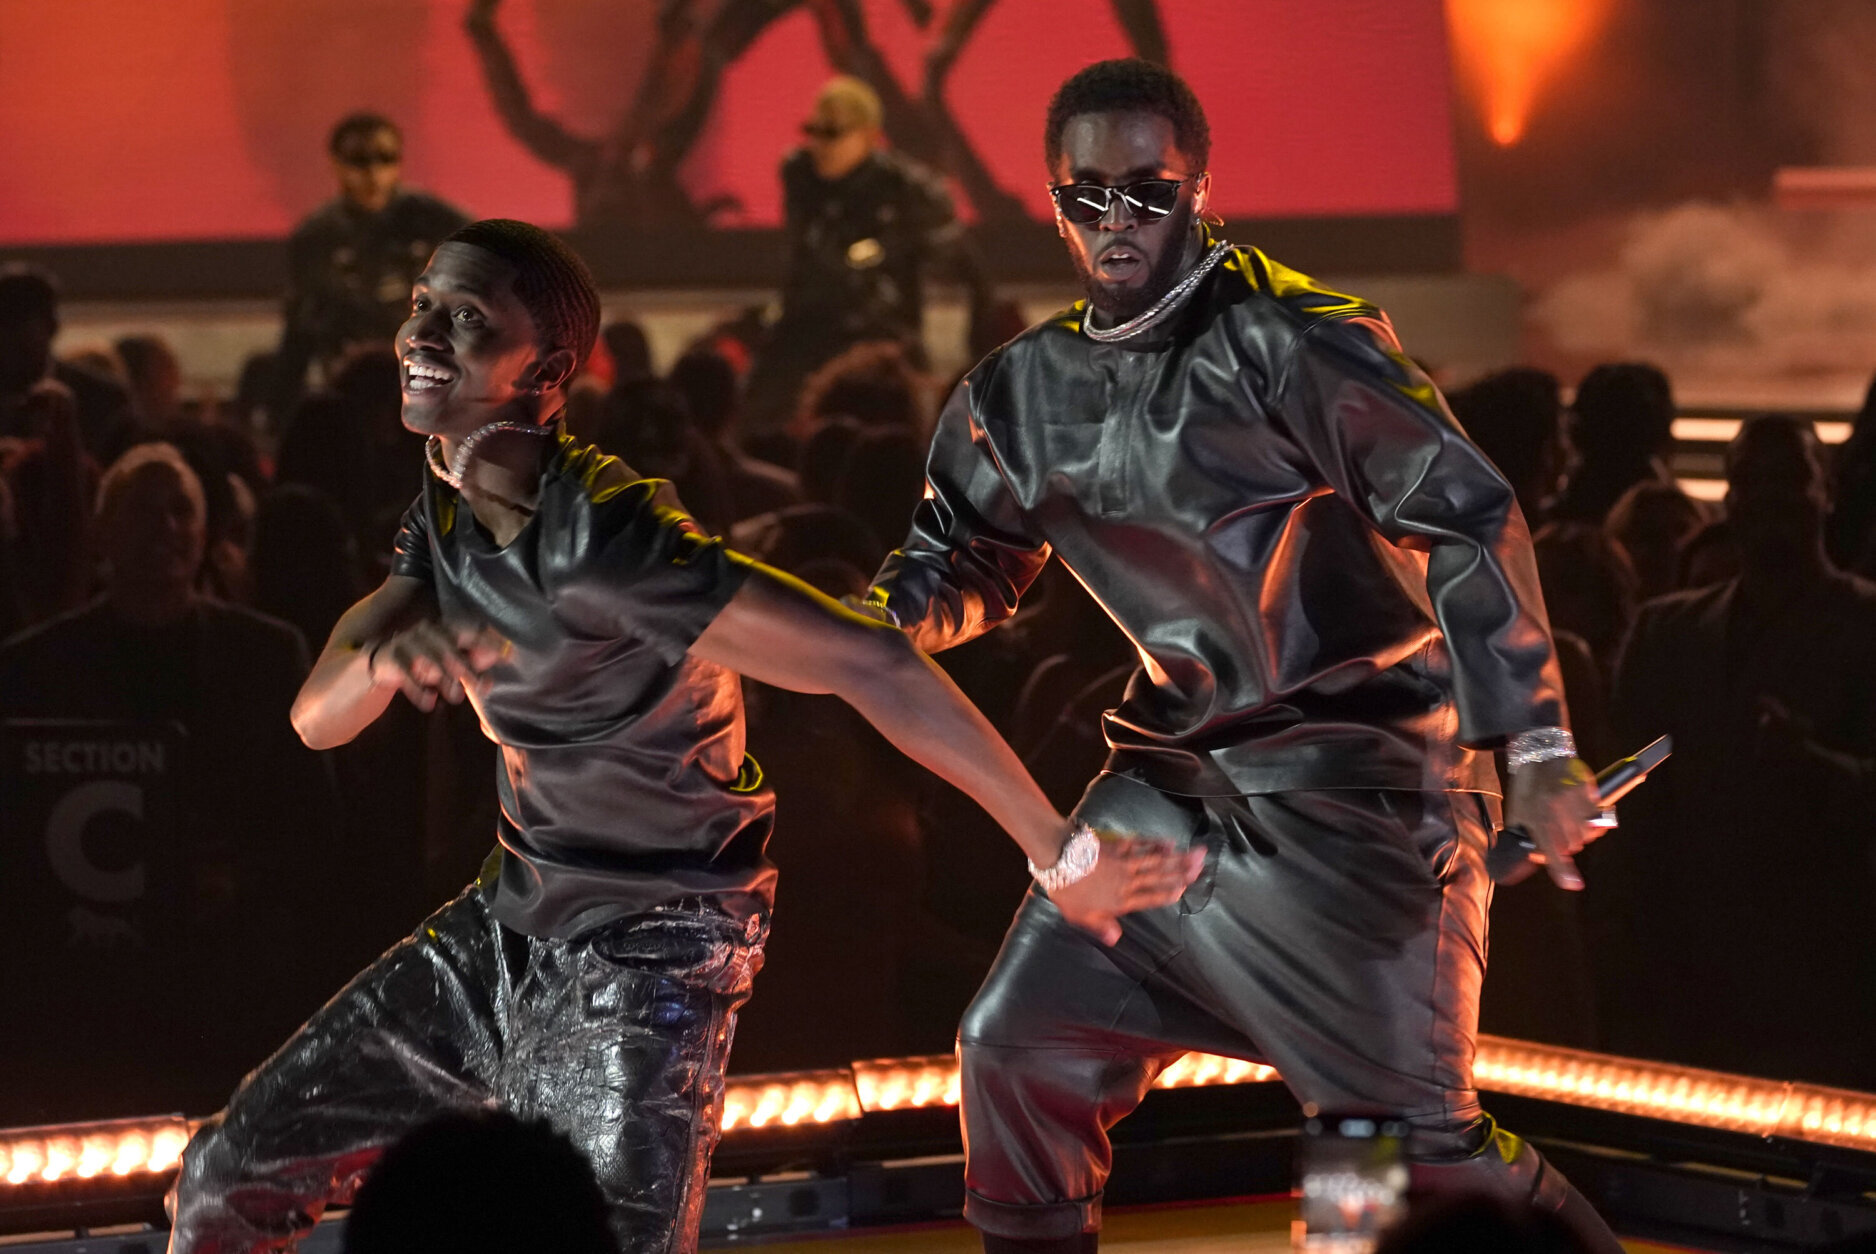 Sean "Diddy" Combs, right, and Christian Combs perform at the Billboard Music Awards on Sunday, May 15, 2022, at the MGM Grand Garden Arena in Las Vegas. (AP Photo/Chris Pizzello)